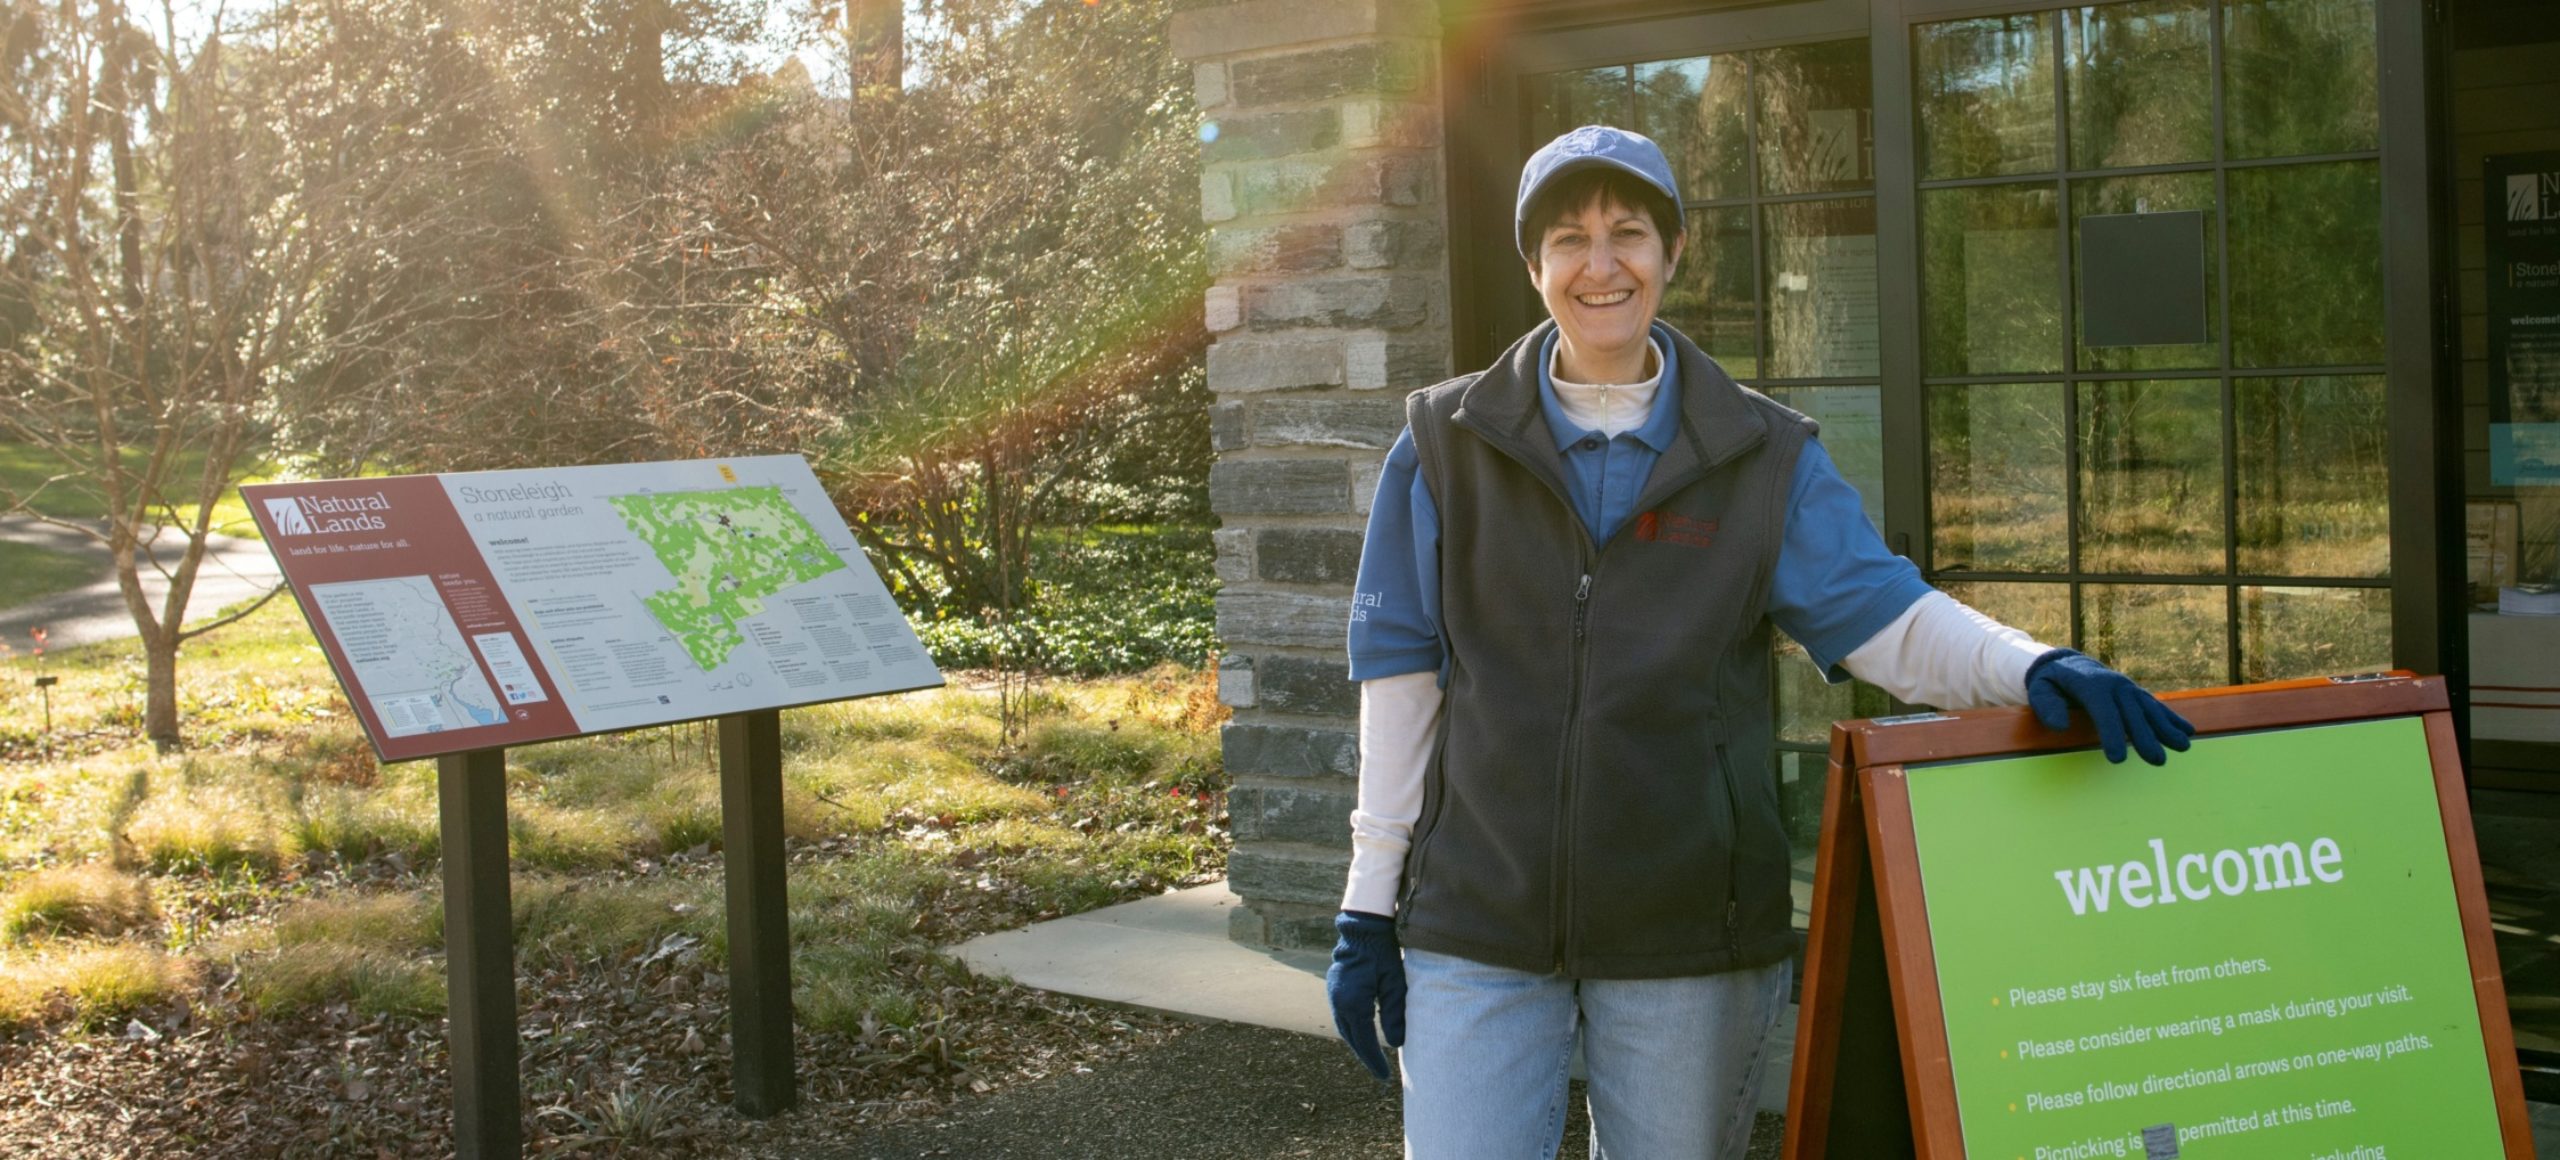 A woman in winter clothes smiles at the camera with one hand on a green welcome sign. In the backround is a map and a stone building.